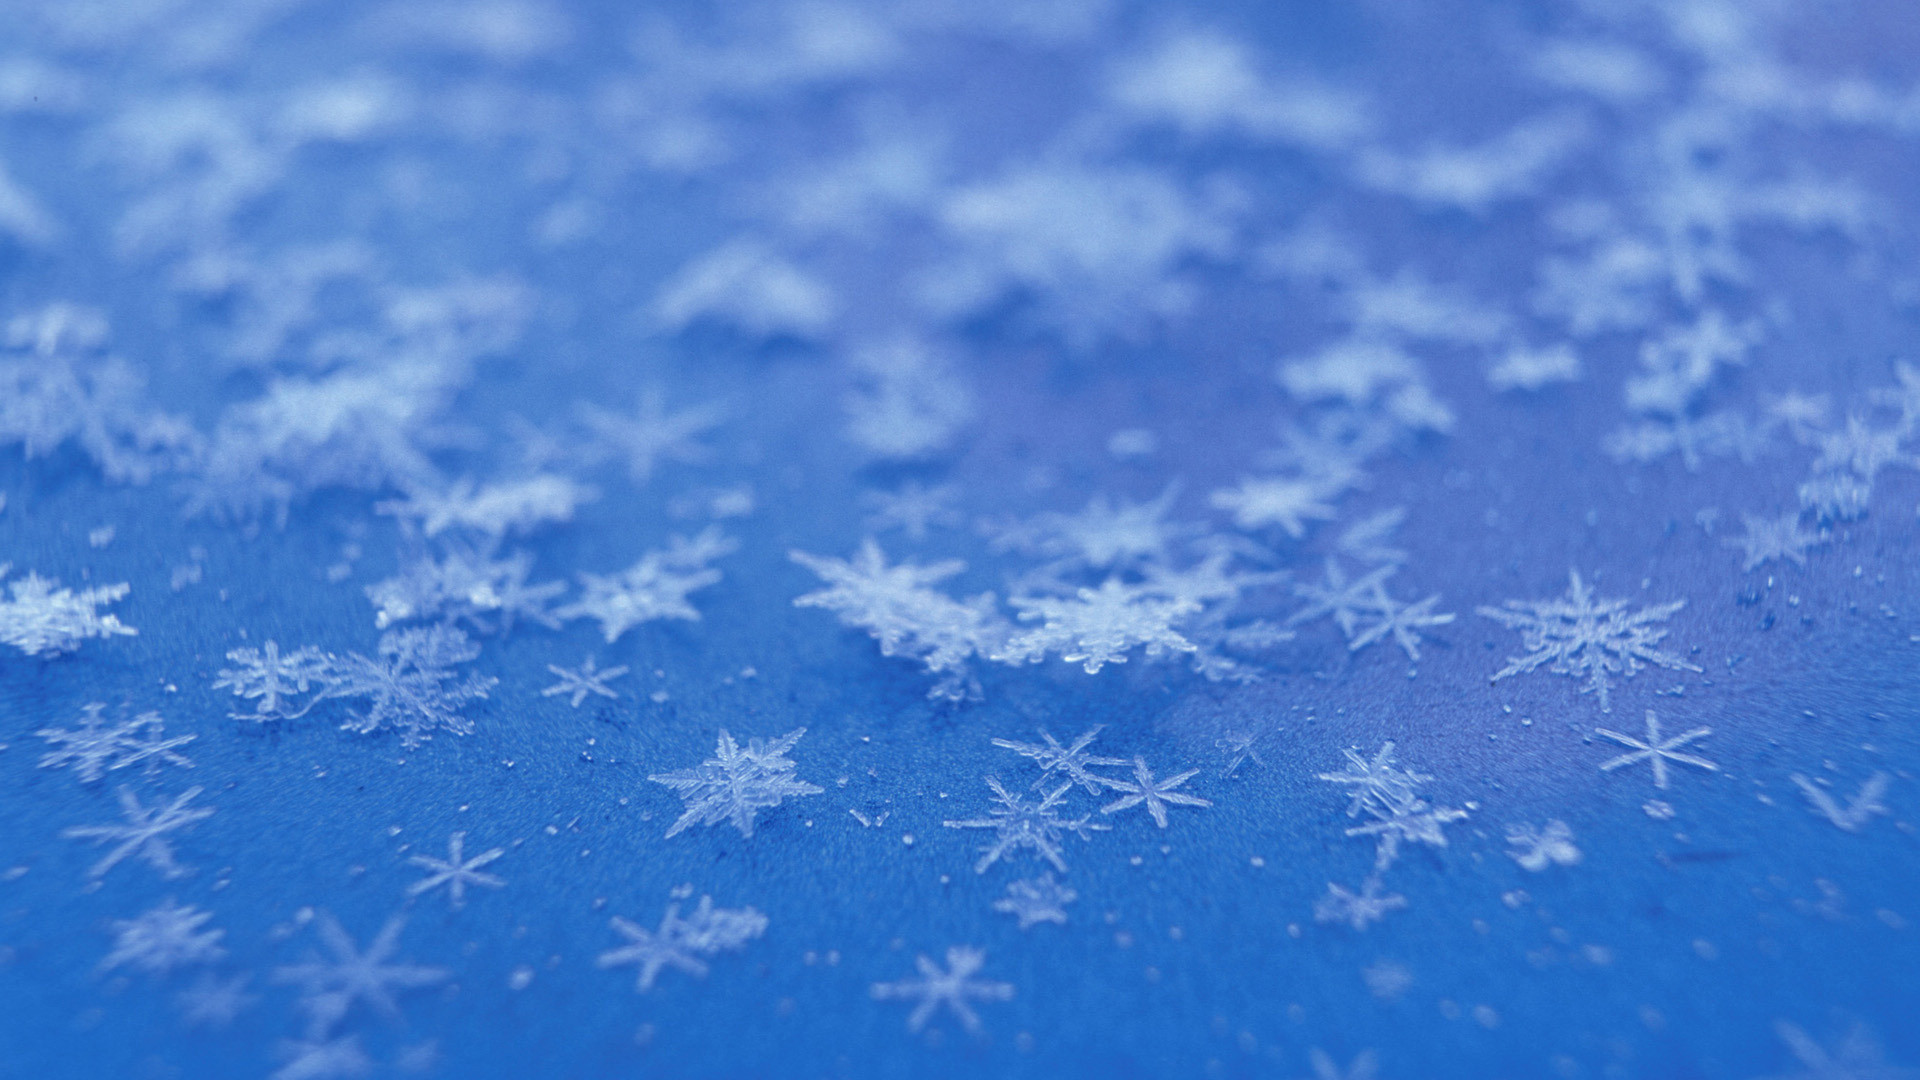 1920x1080 By Enid Tilton V.281: Amazing Snowflakes Pictures & Backgrounds